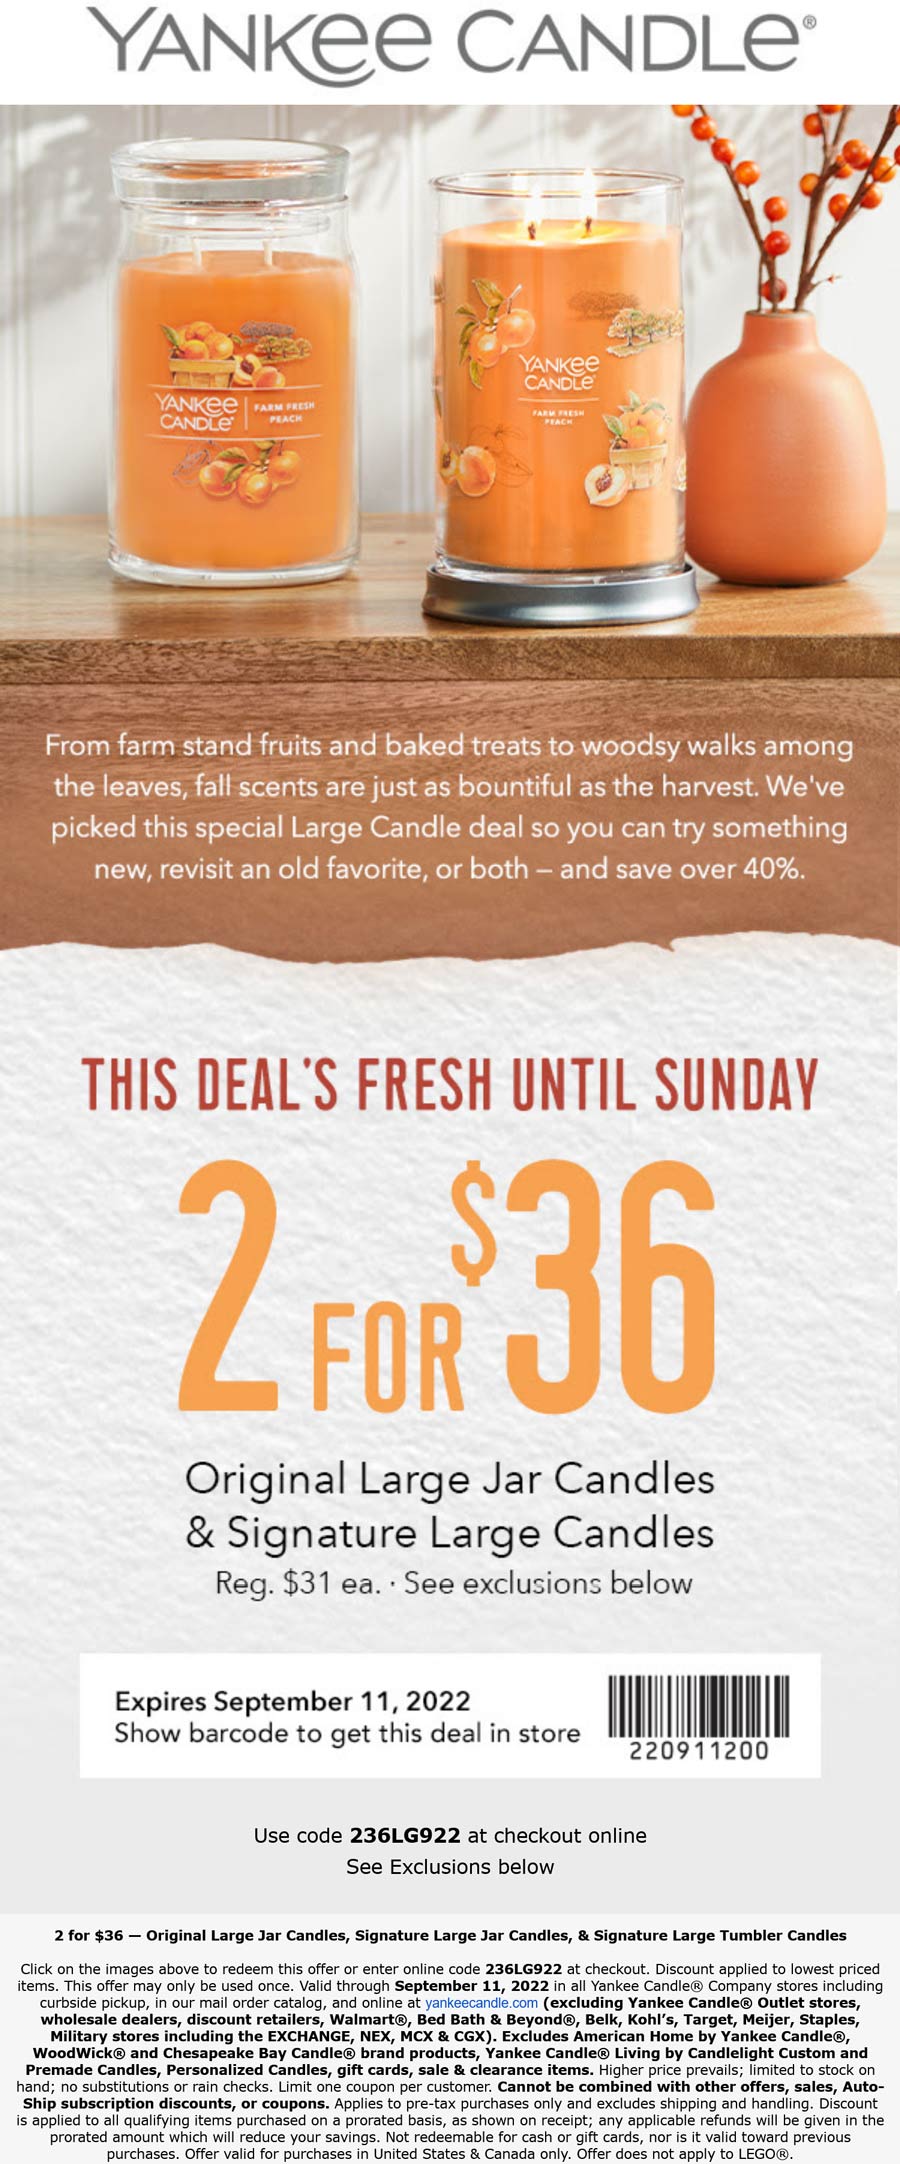 Yankee Candle stores Coupon  2 large jar candles for $36 at Yankee Candle, or online via promo code 236LG922 #yankeecandle 